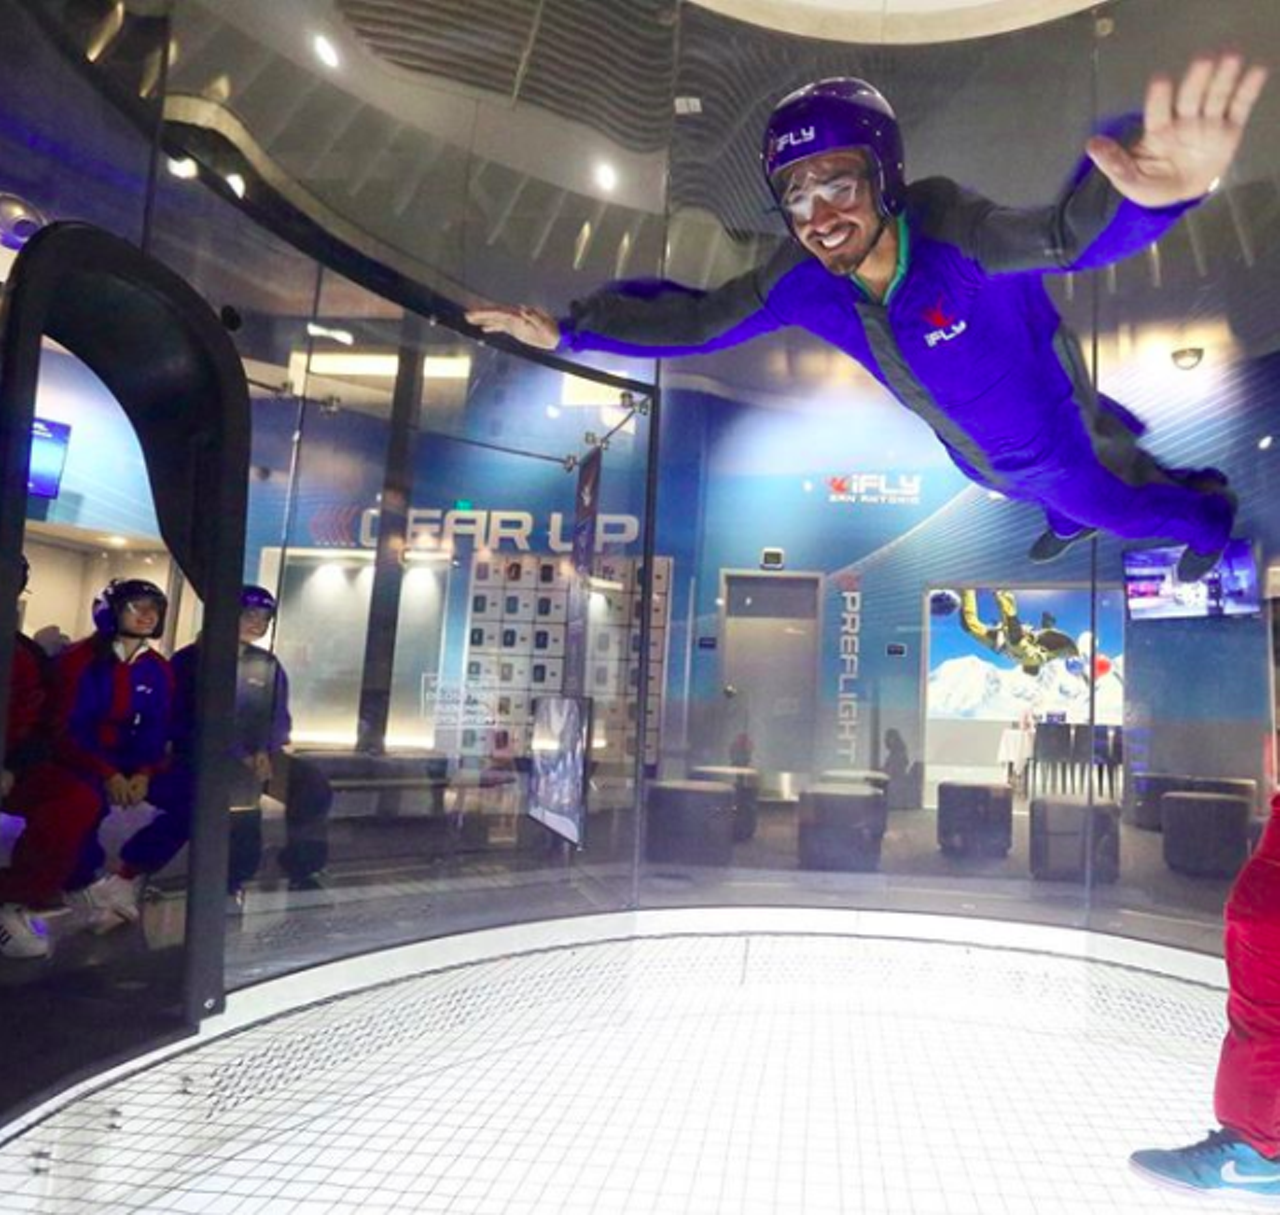 iFly
15915 I-10, (210) 762-4359, iflyworld.com
Defy gravity and reach new heights with iFly. This spot gives you the chance to experience the thrill of skydiving without the risk with an interactive chamber. You’ll even receive a flight certificate, which your kids will probably show off for years to come.
Photo via osalanis / Instagram